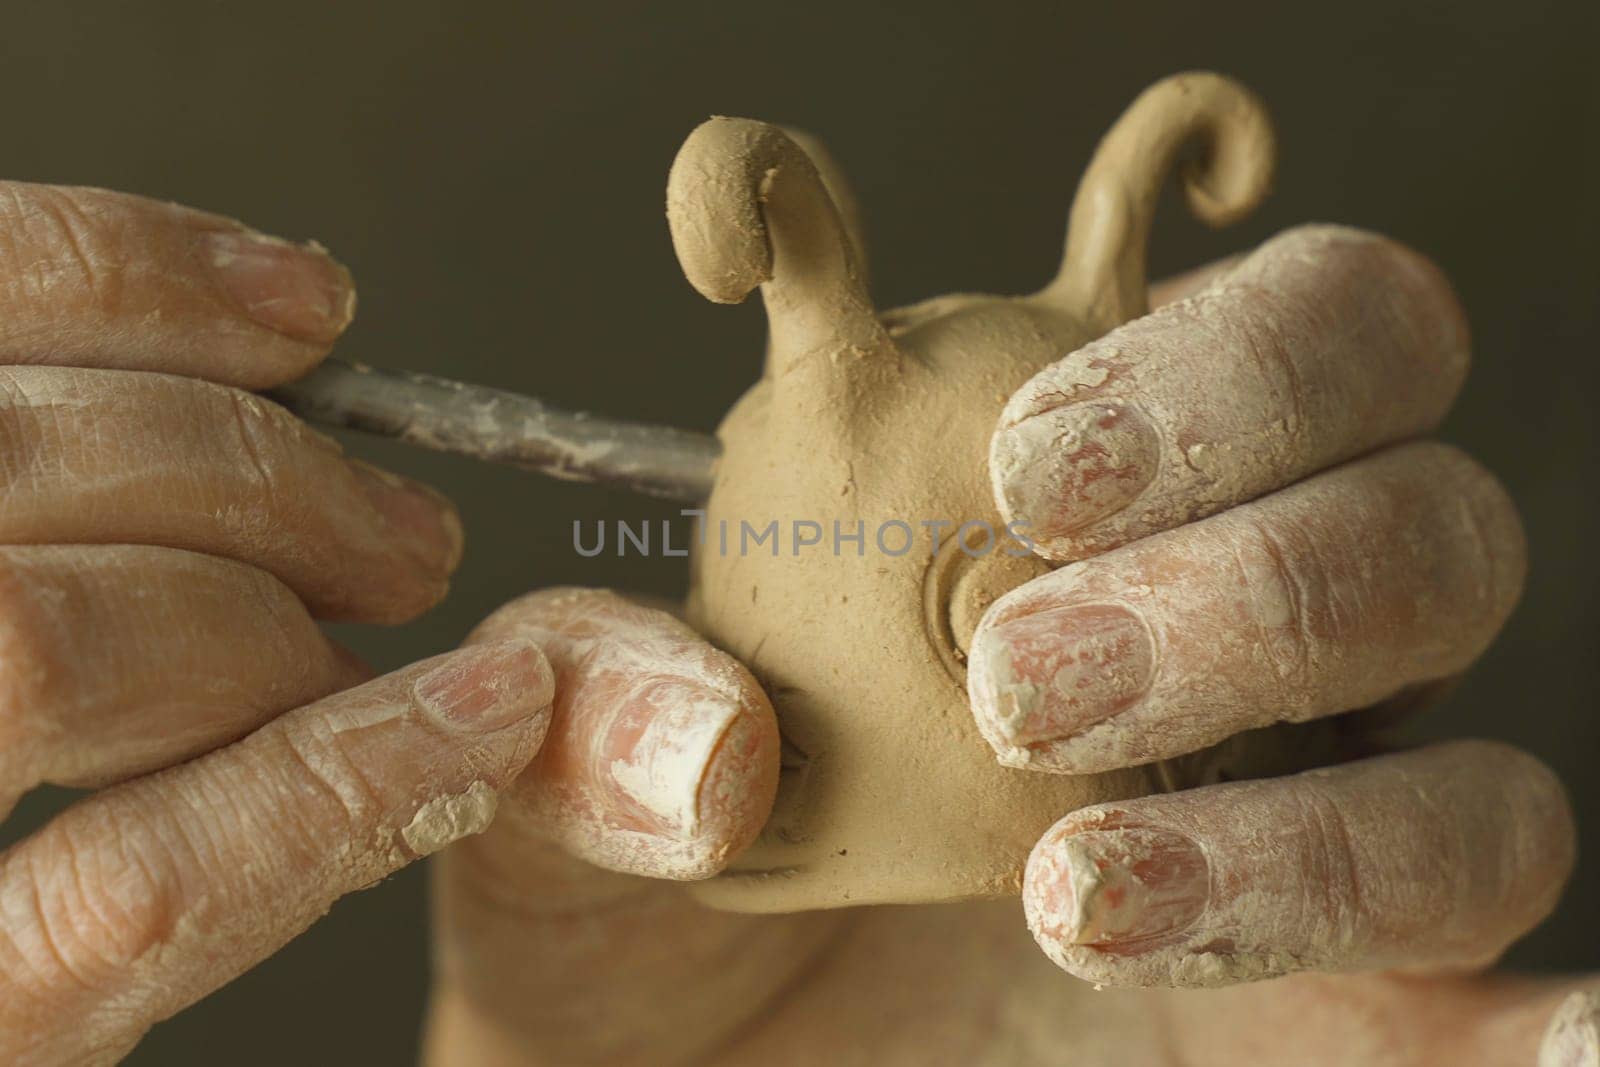 A woman makes holes using a tool in a clay craft - a candlestick. Close-up. Hobbies and creativity.